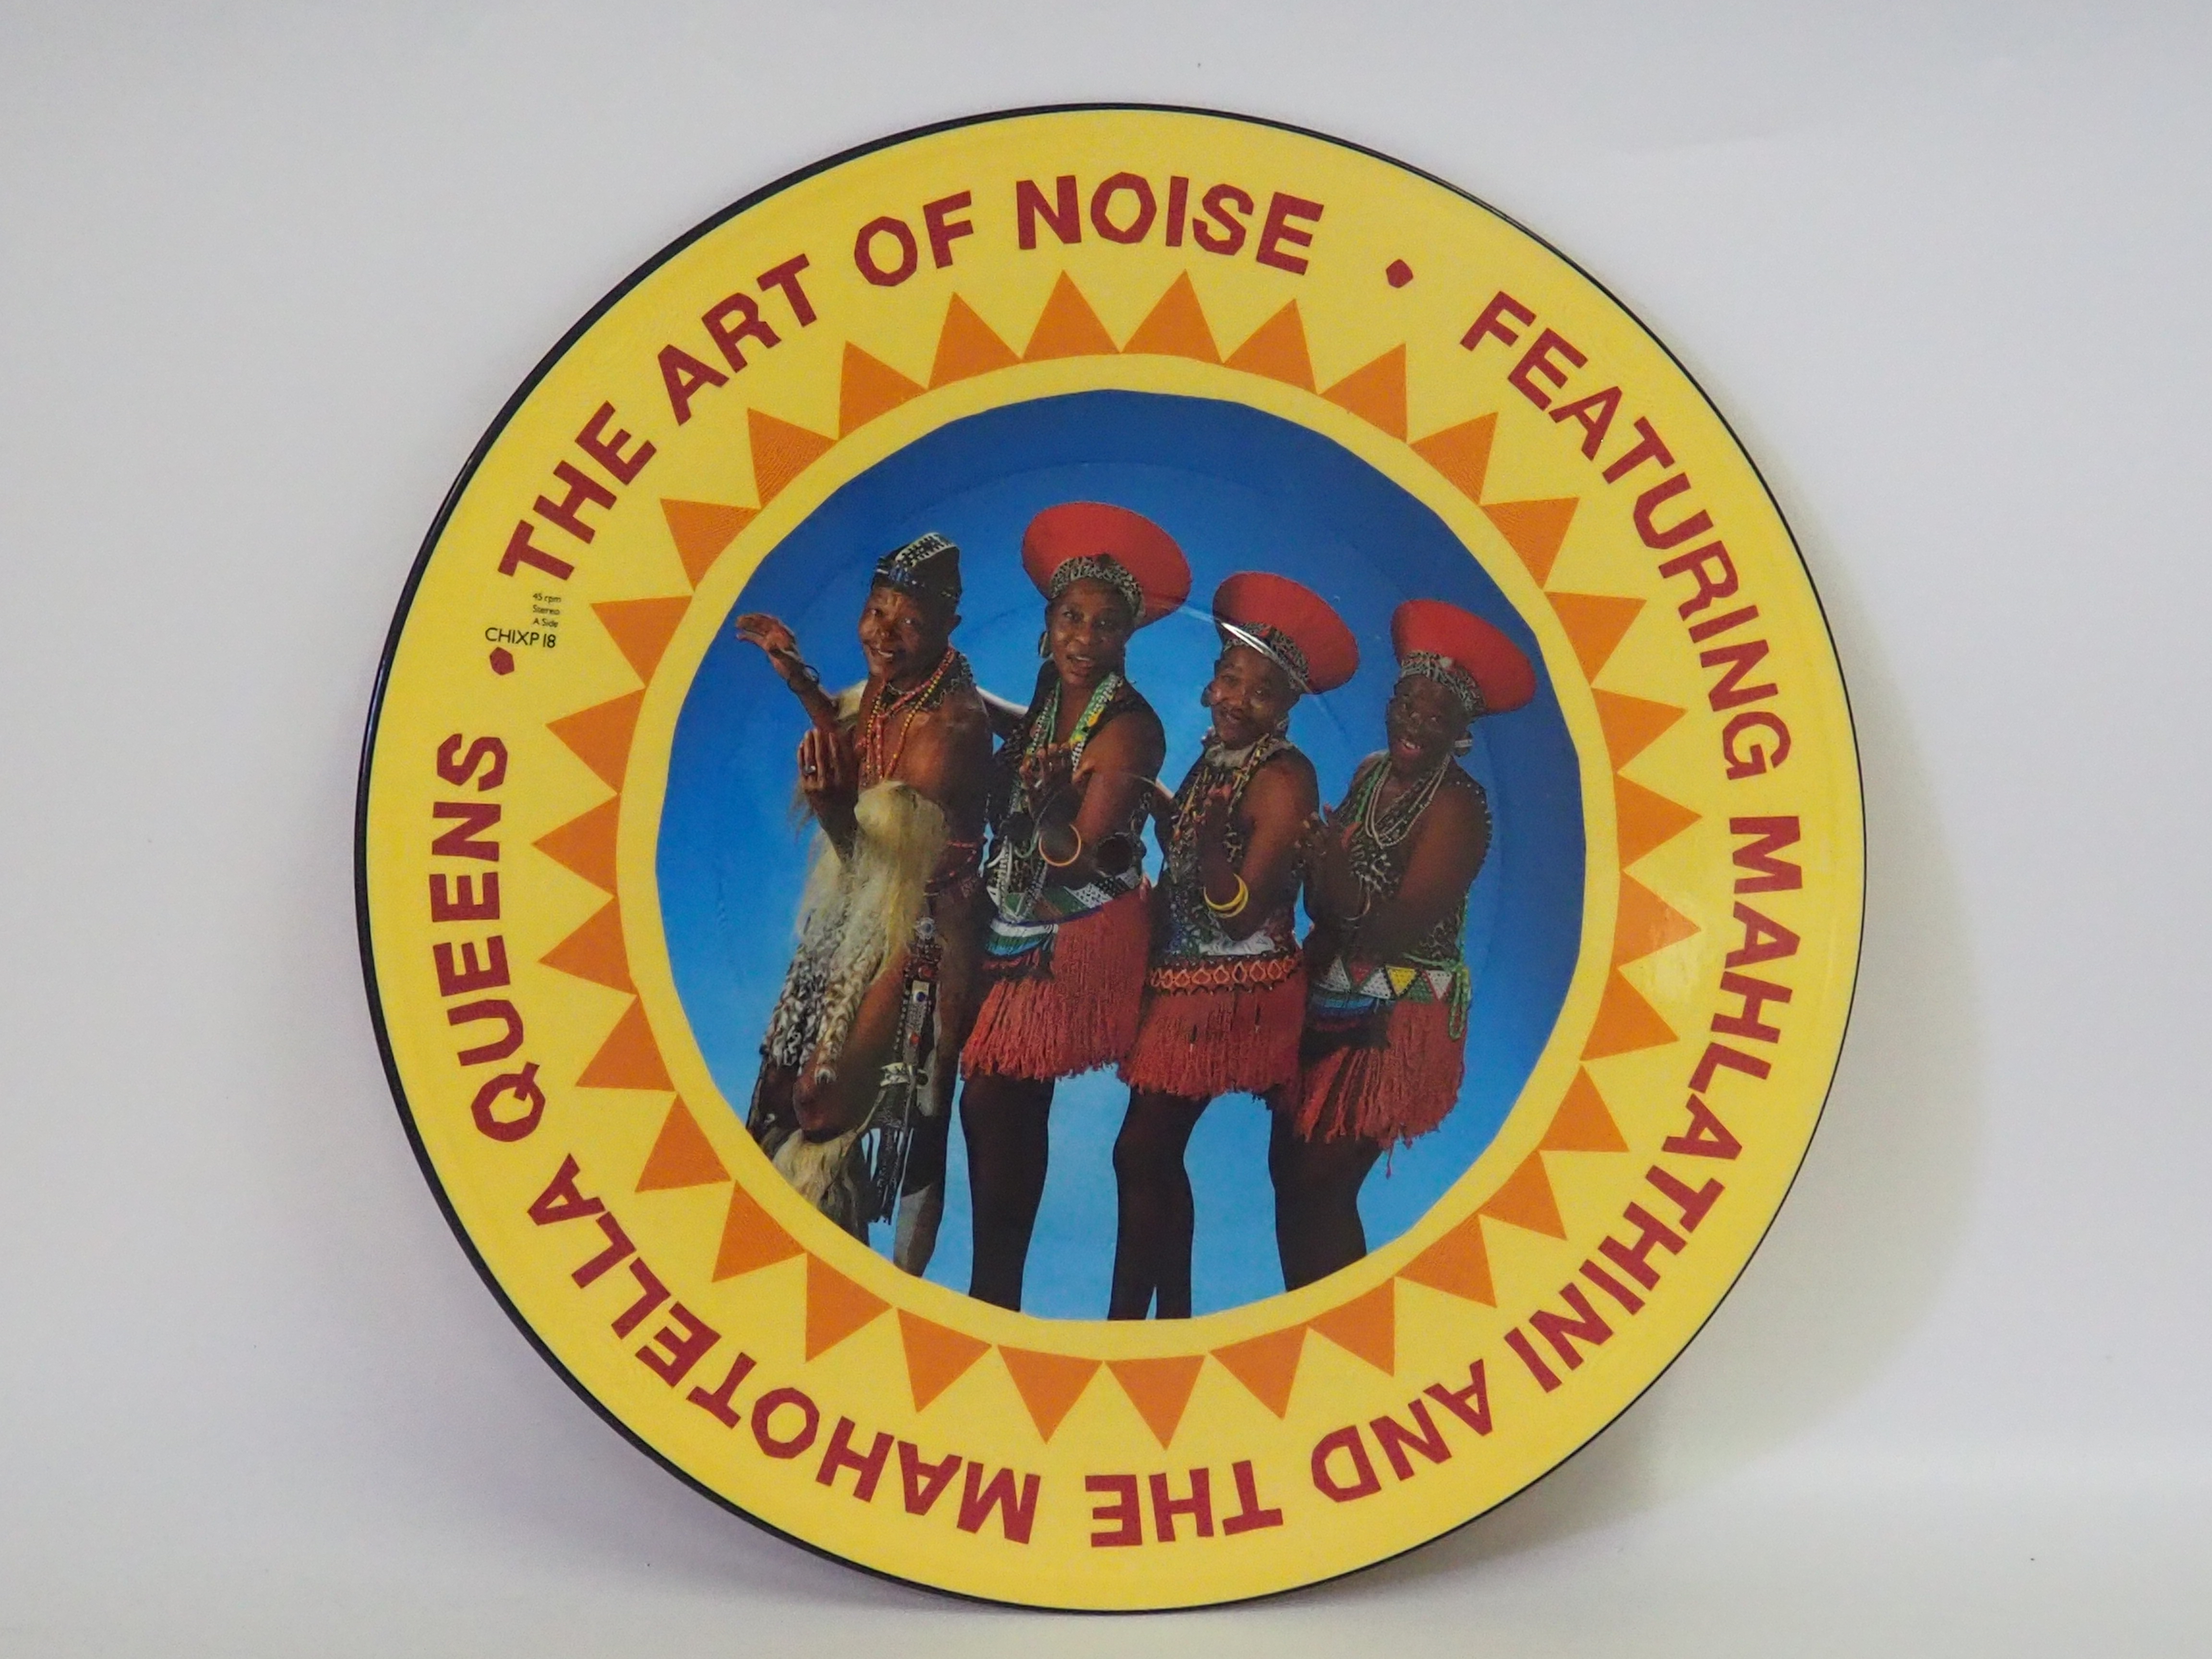 The Art of Noise - Featuring Mahlathini and the Mahotelle queens 12' picture vinyl